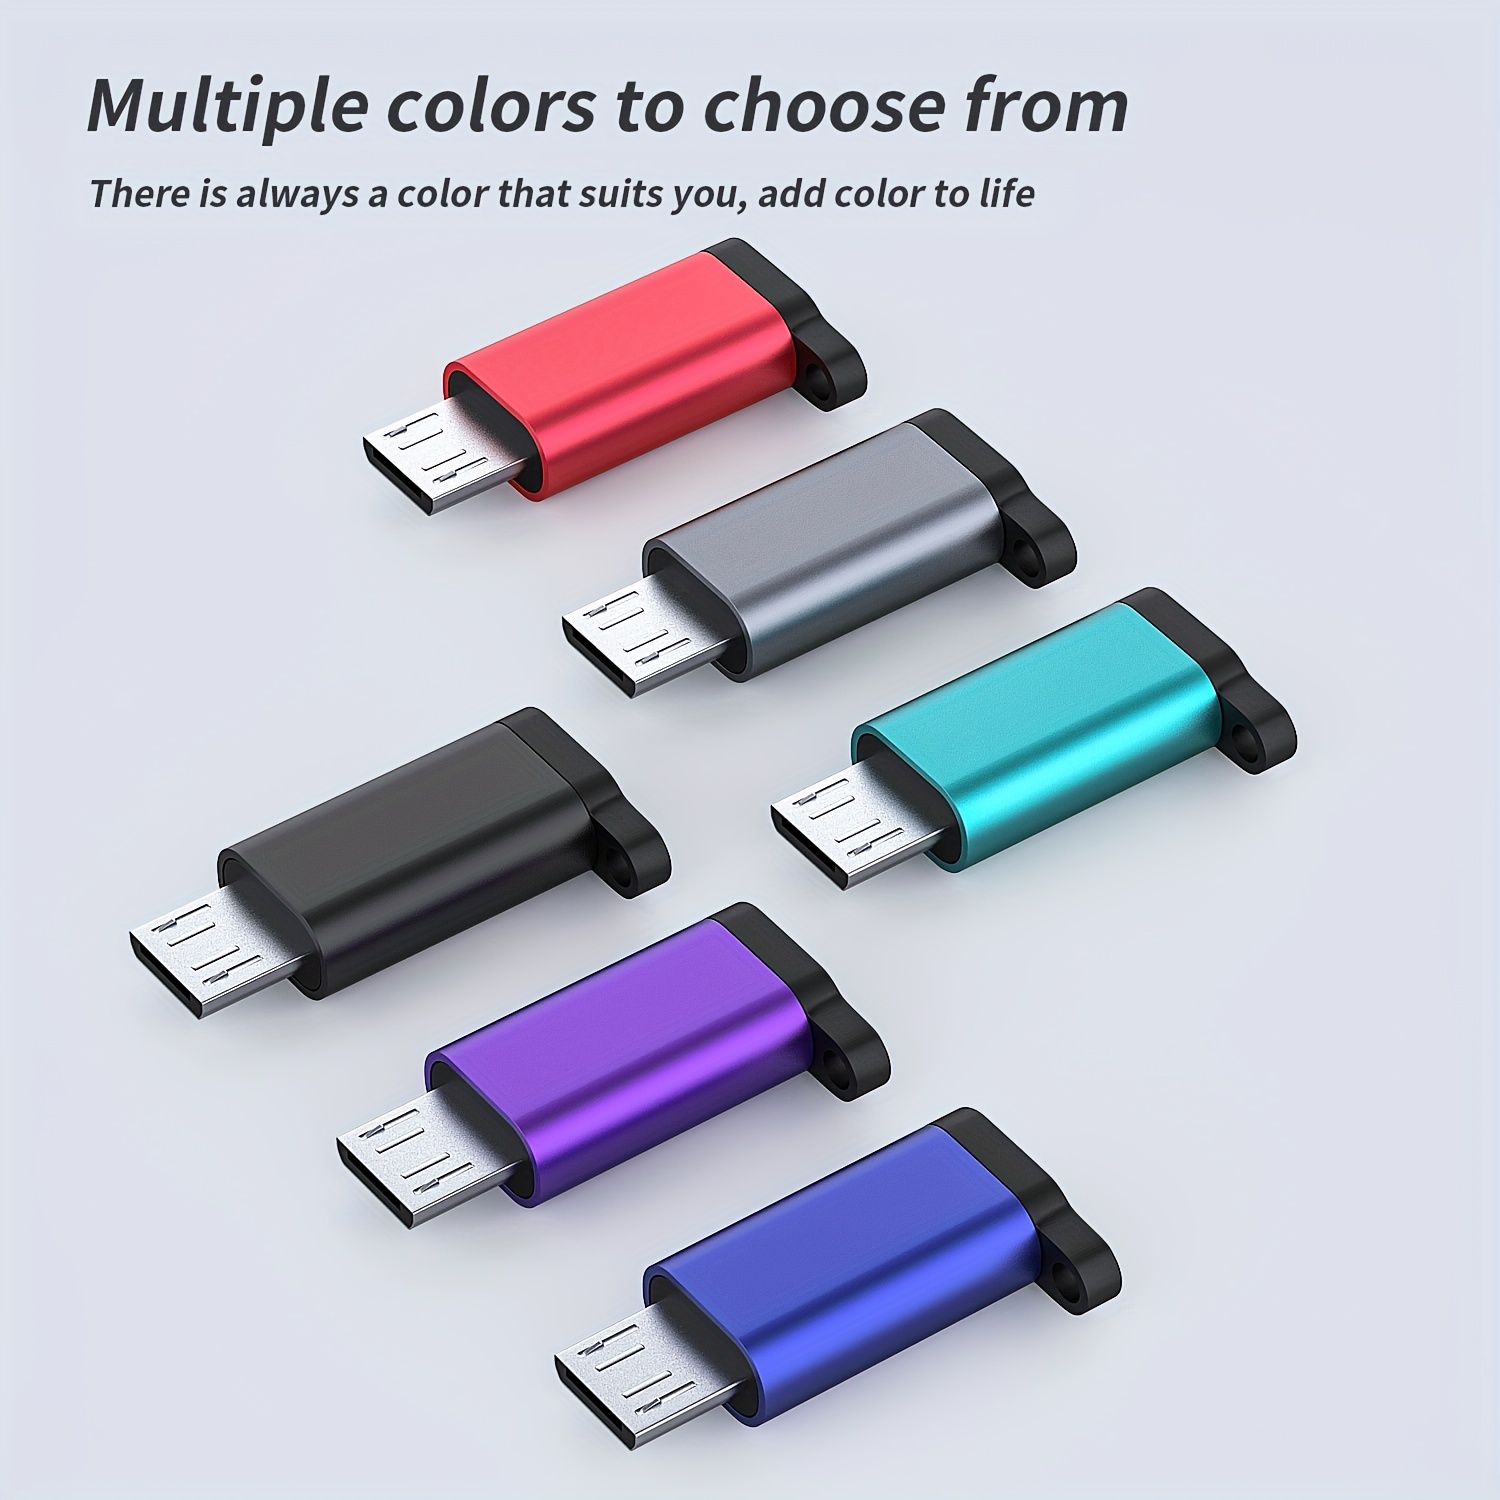 

Usb-c F To Micro Usb Adapter, 6pcs Usb Type C Female To Micro Usb Male Converter Usb C To Micro B 2.0 Charge & Data Sync For Samsung/galaxy S7 S6 J7 Note 5 For /ps4 And More